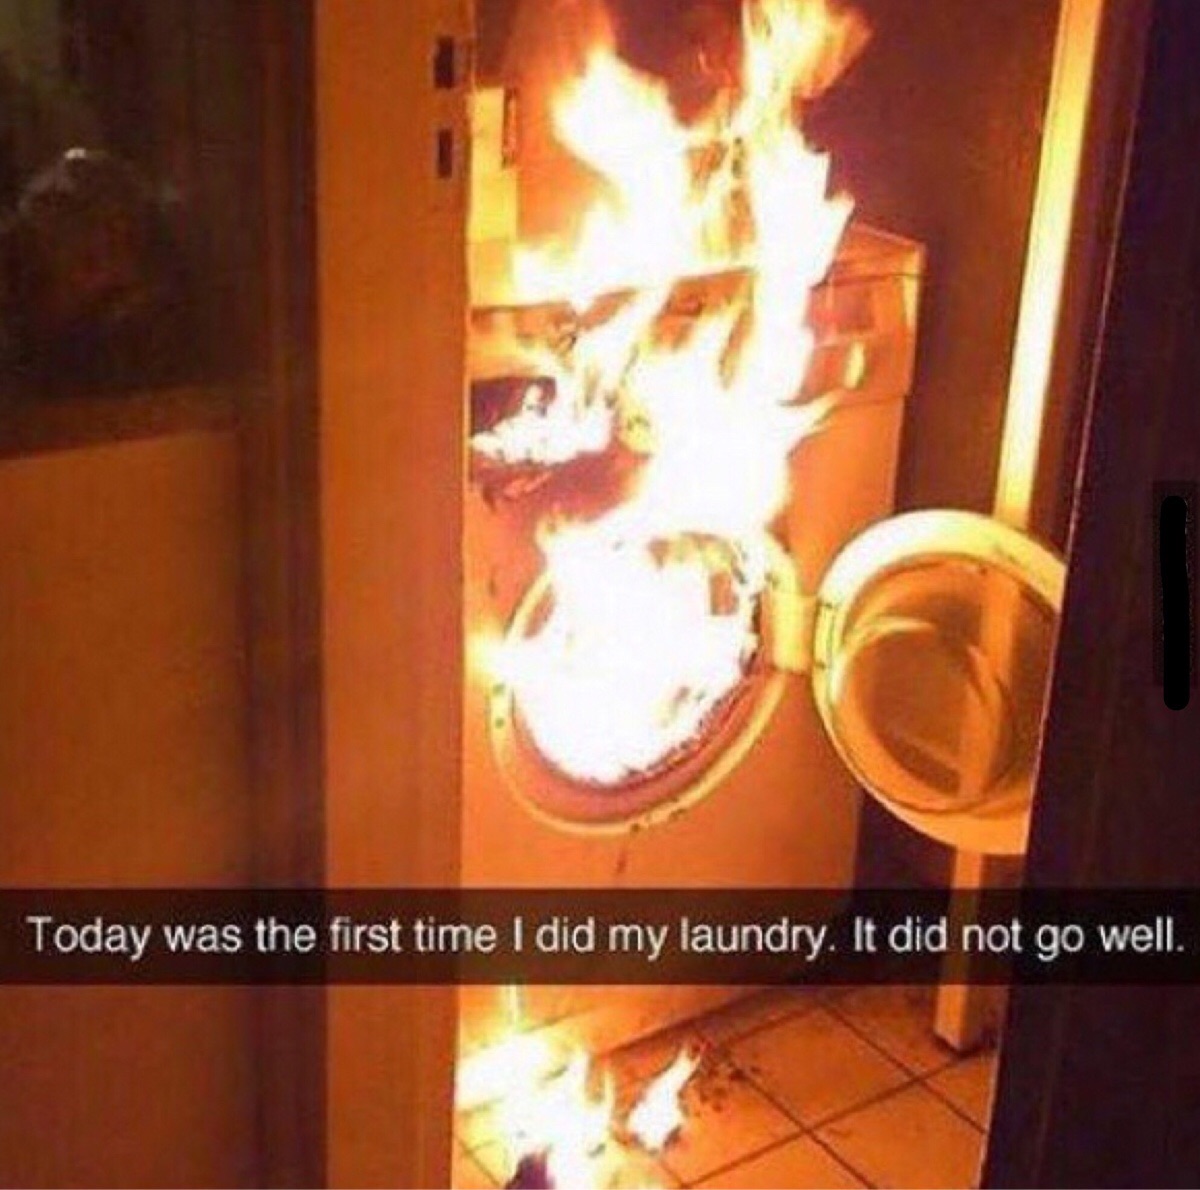 did laundry for the first time - Today was the first time I did my laundry. It did not go well.